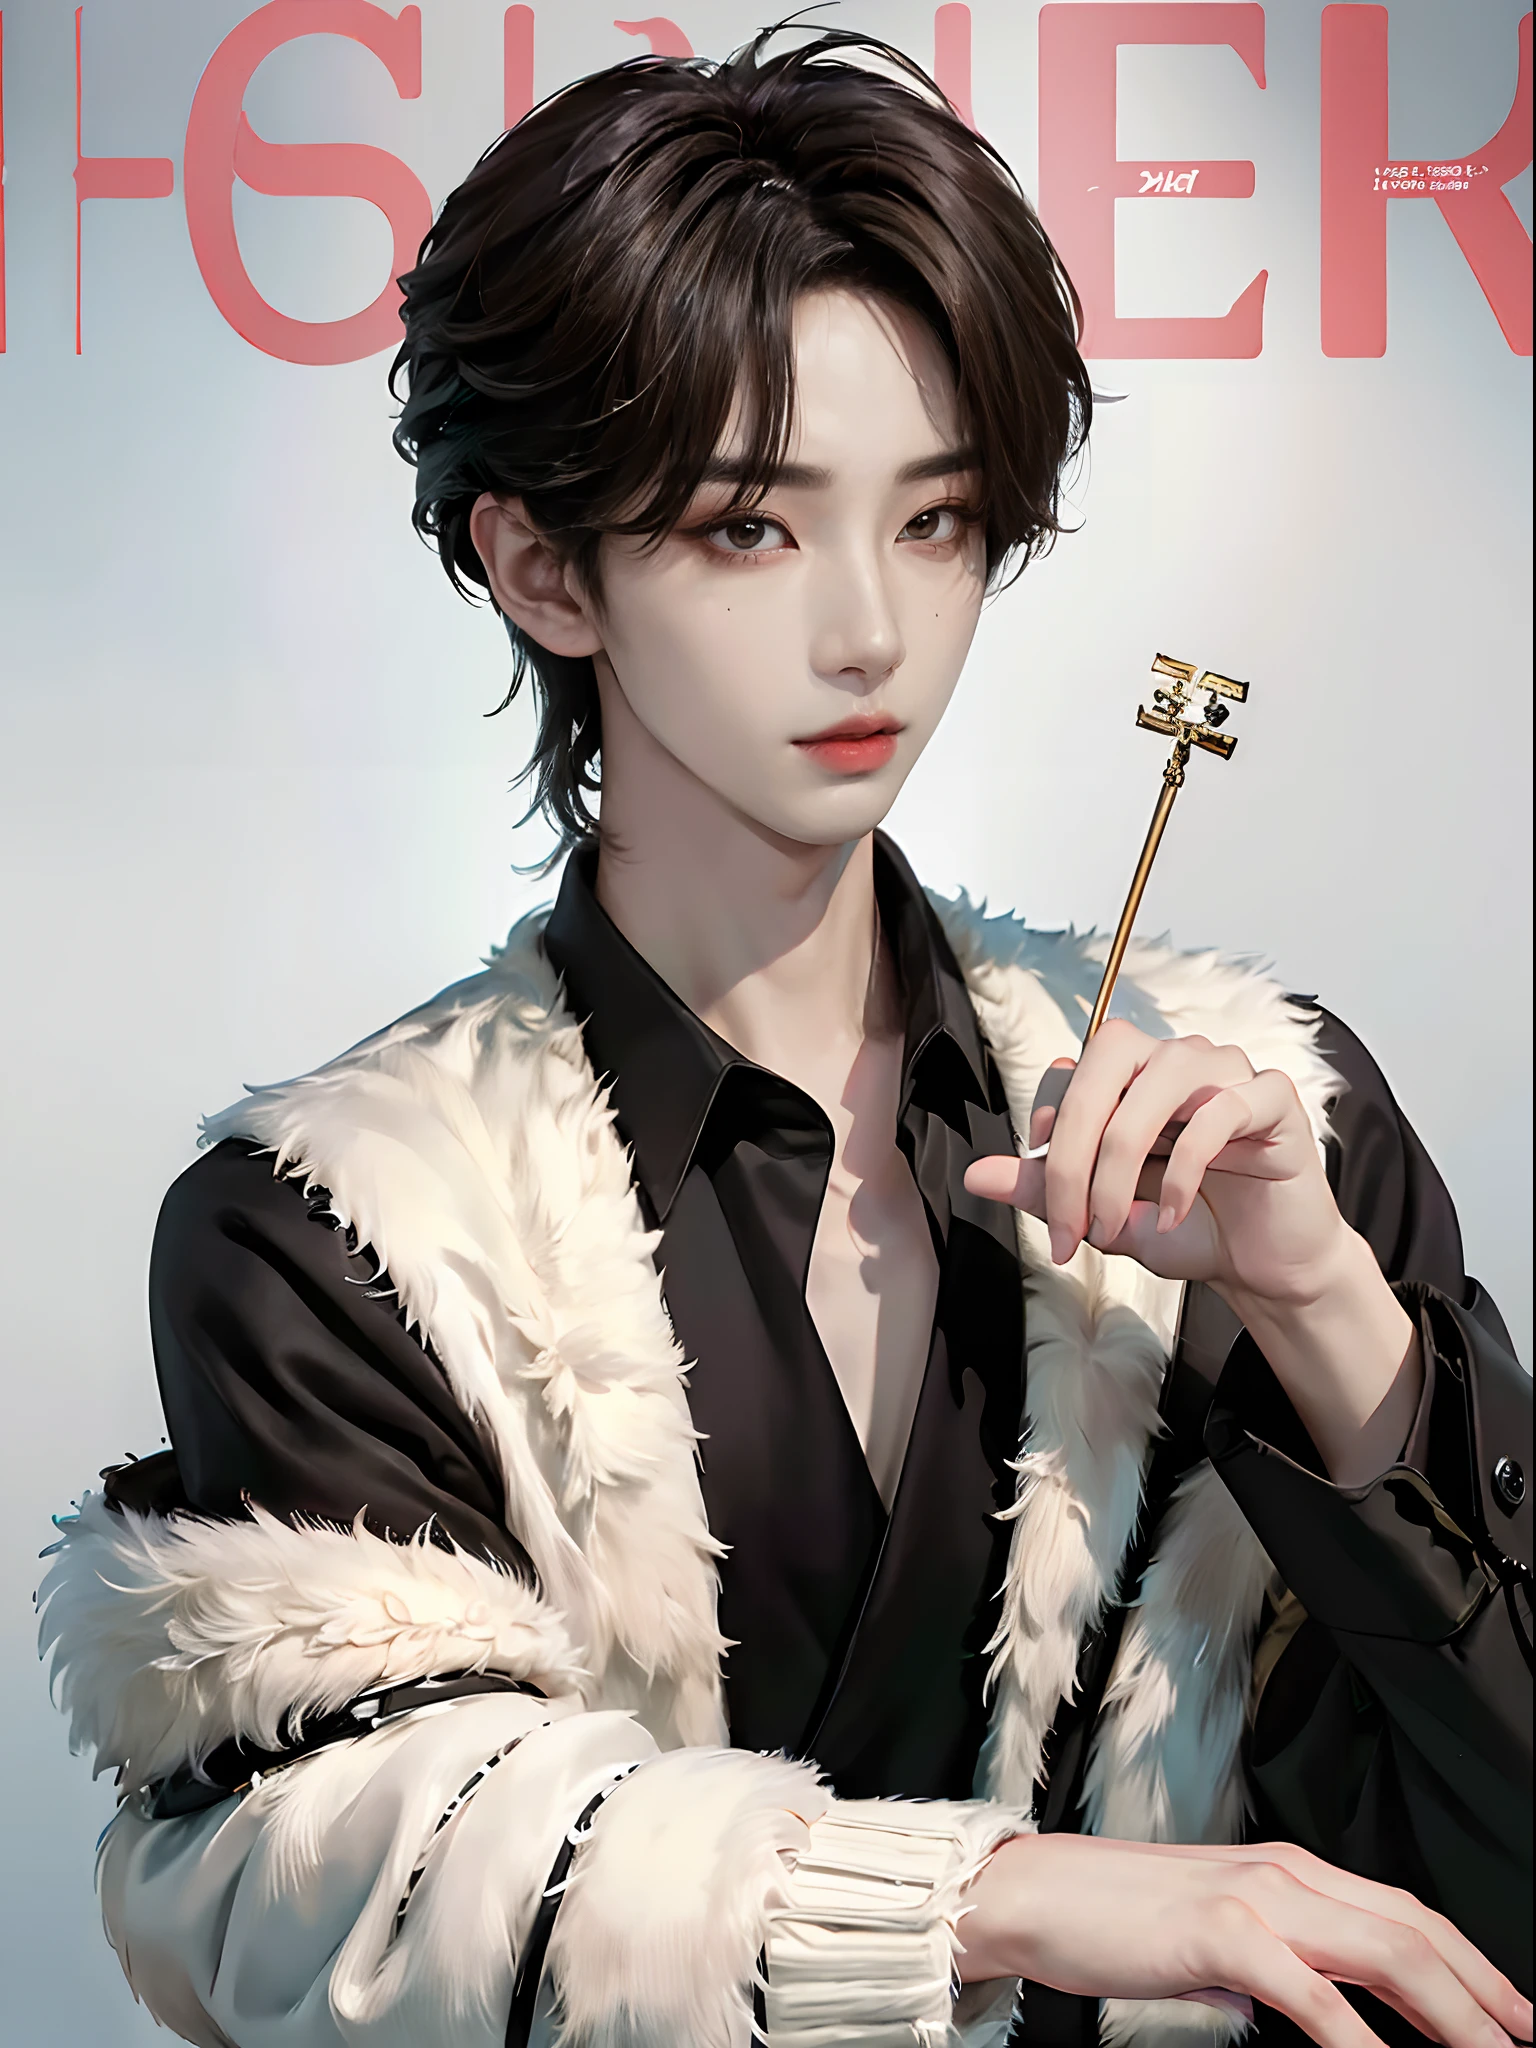 ((4K works))、​masterpiece、（top-quality)、((high-level image quality))、((One Manly Boy))、Slim body、((Man in black tuxedo))、(Detailed beautiful eyeodel Magazines))、Face similar to Chaewon in Ruseraphim、((short hair above the ears))、((Smaller face))、((Neutral face))、((Light brown eyes))、((Korean boy))、((18year old))、((Handsome man))、((A charming expression))、((Korean Makeup))、((elongated and sharp eyes))、((Focus zoom out))、((Model Magazine Cover))、((model poseodel photo))、Professional Photoagazine covers))、((Shot alone))